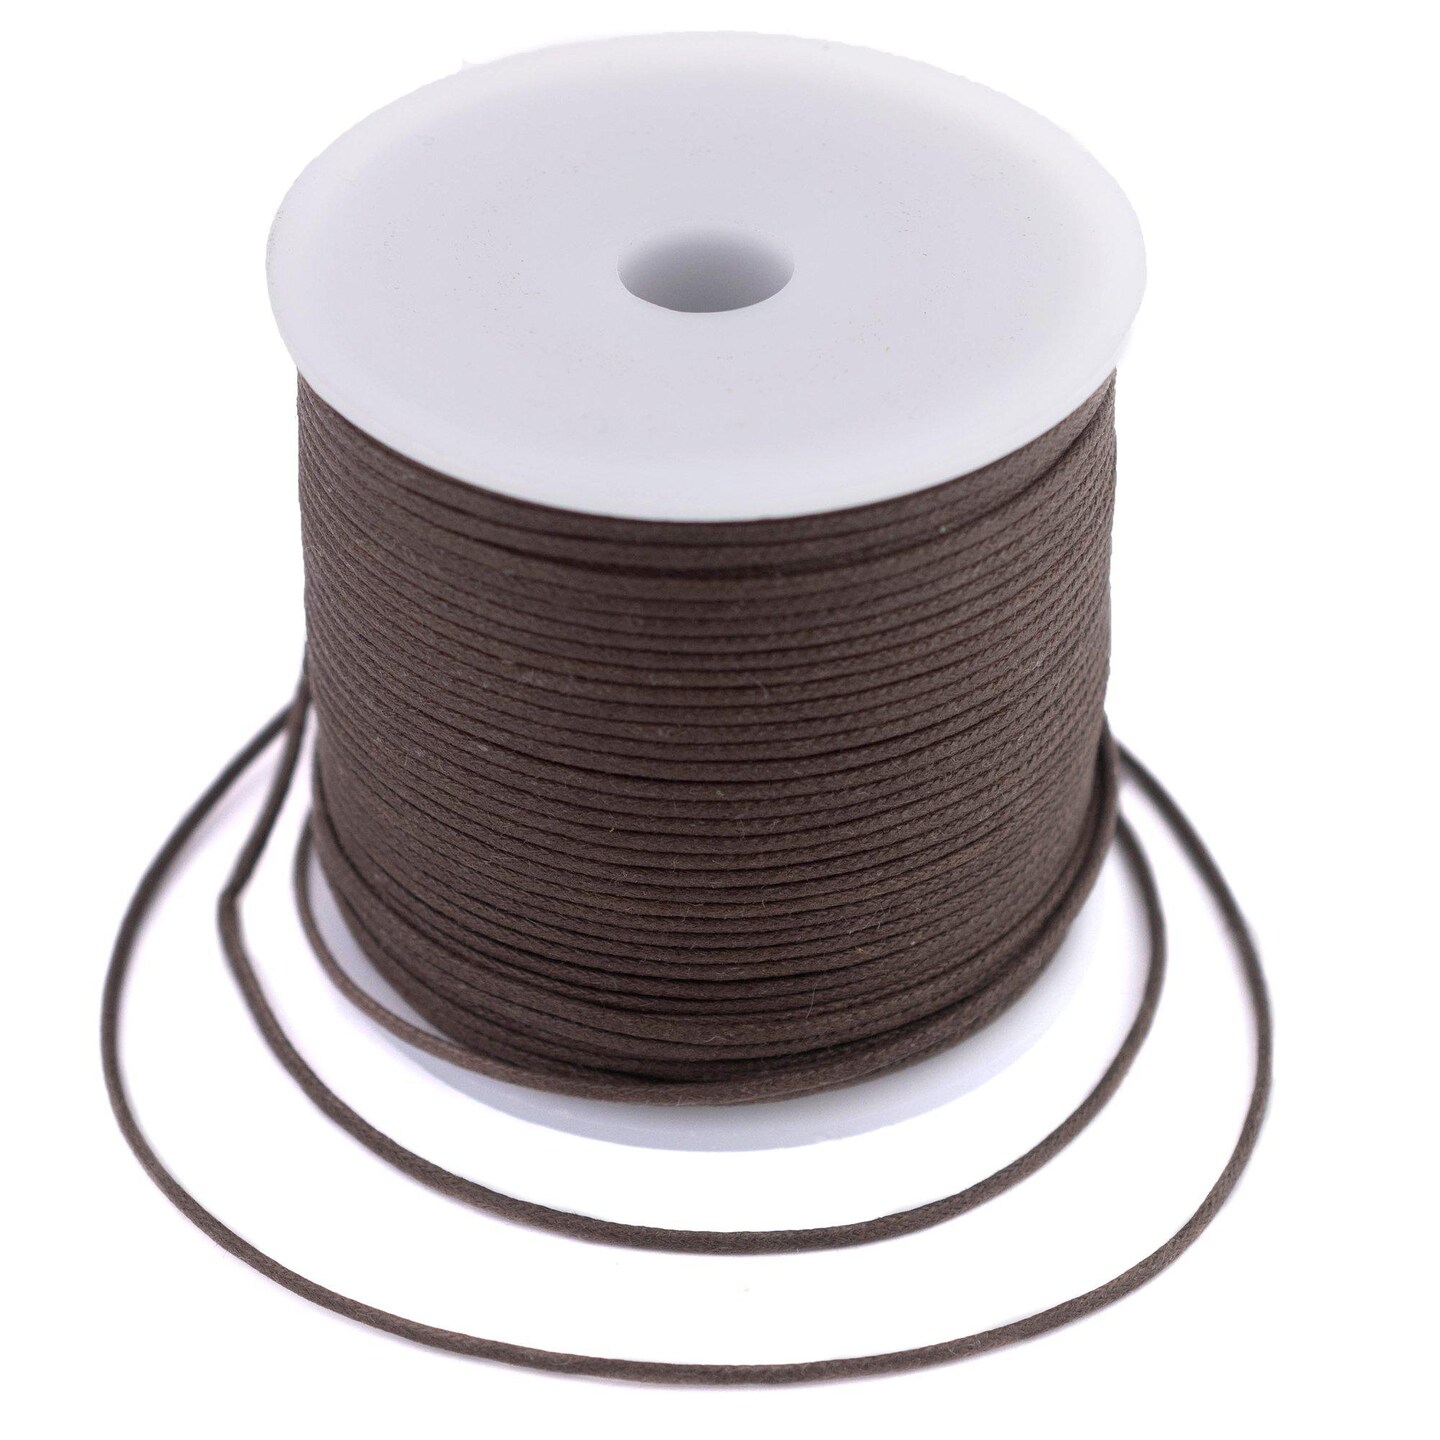 TheBeadChest 1.5mm Coffee Brown Waxed Cotton Cord (300ft)